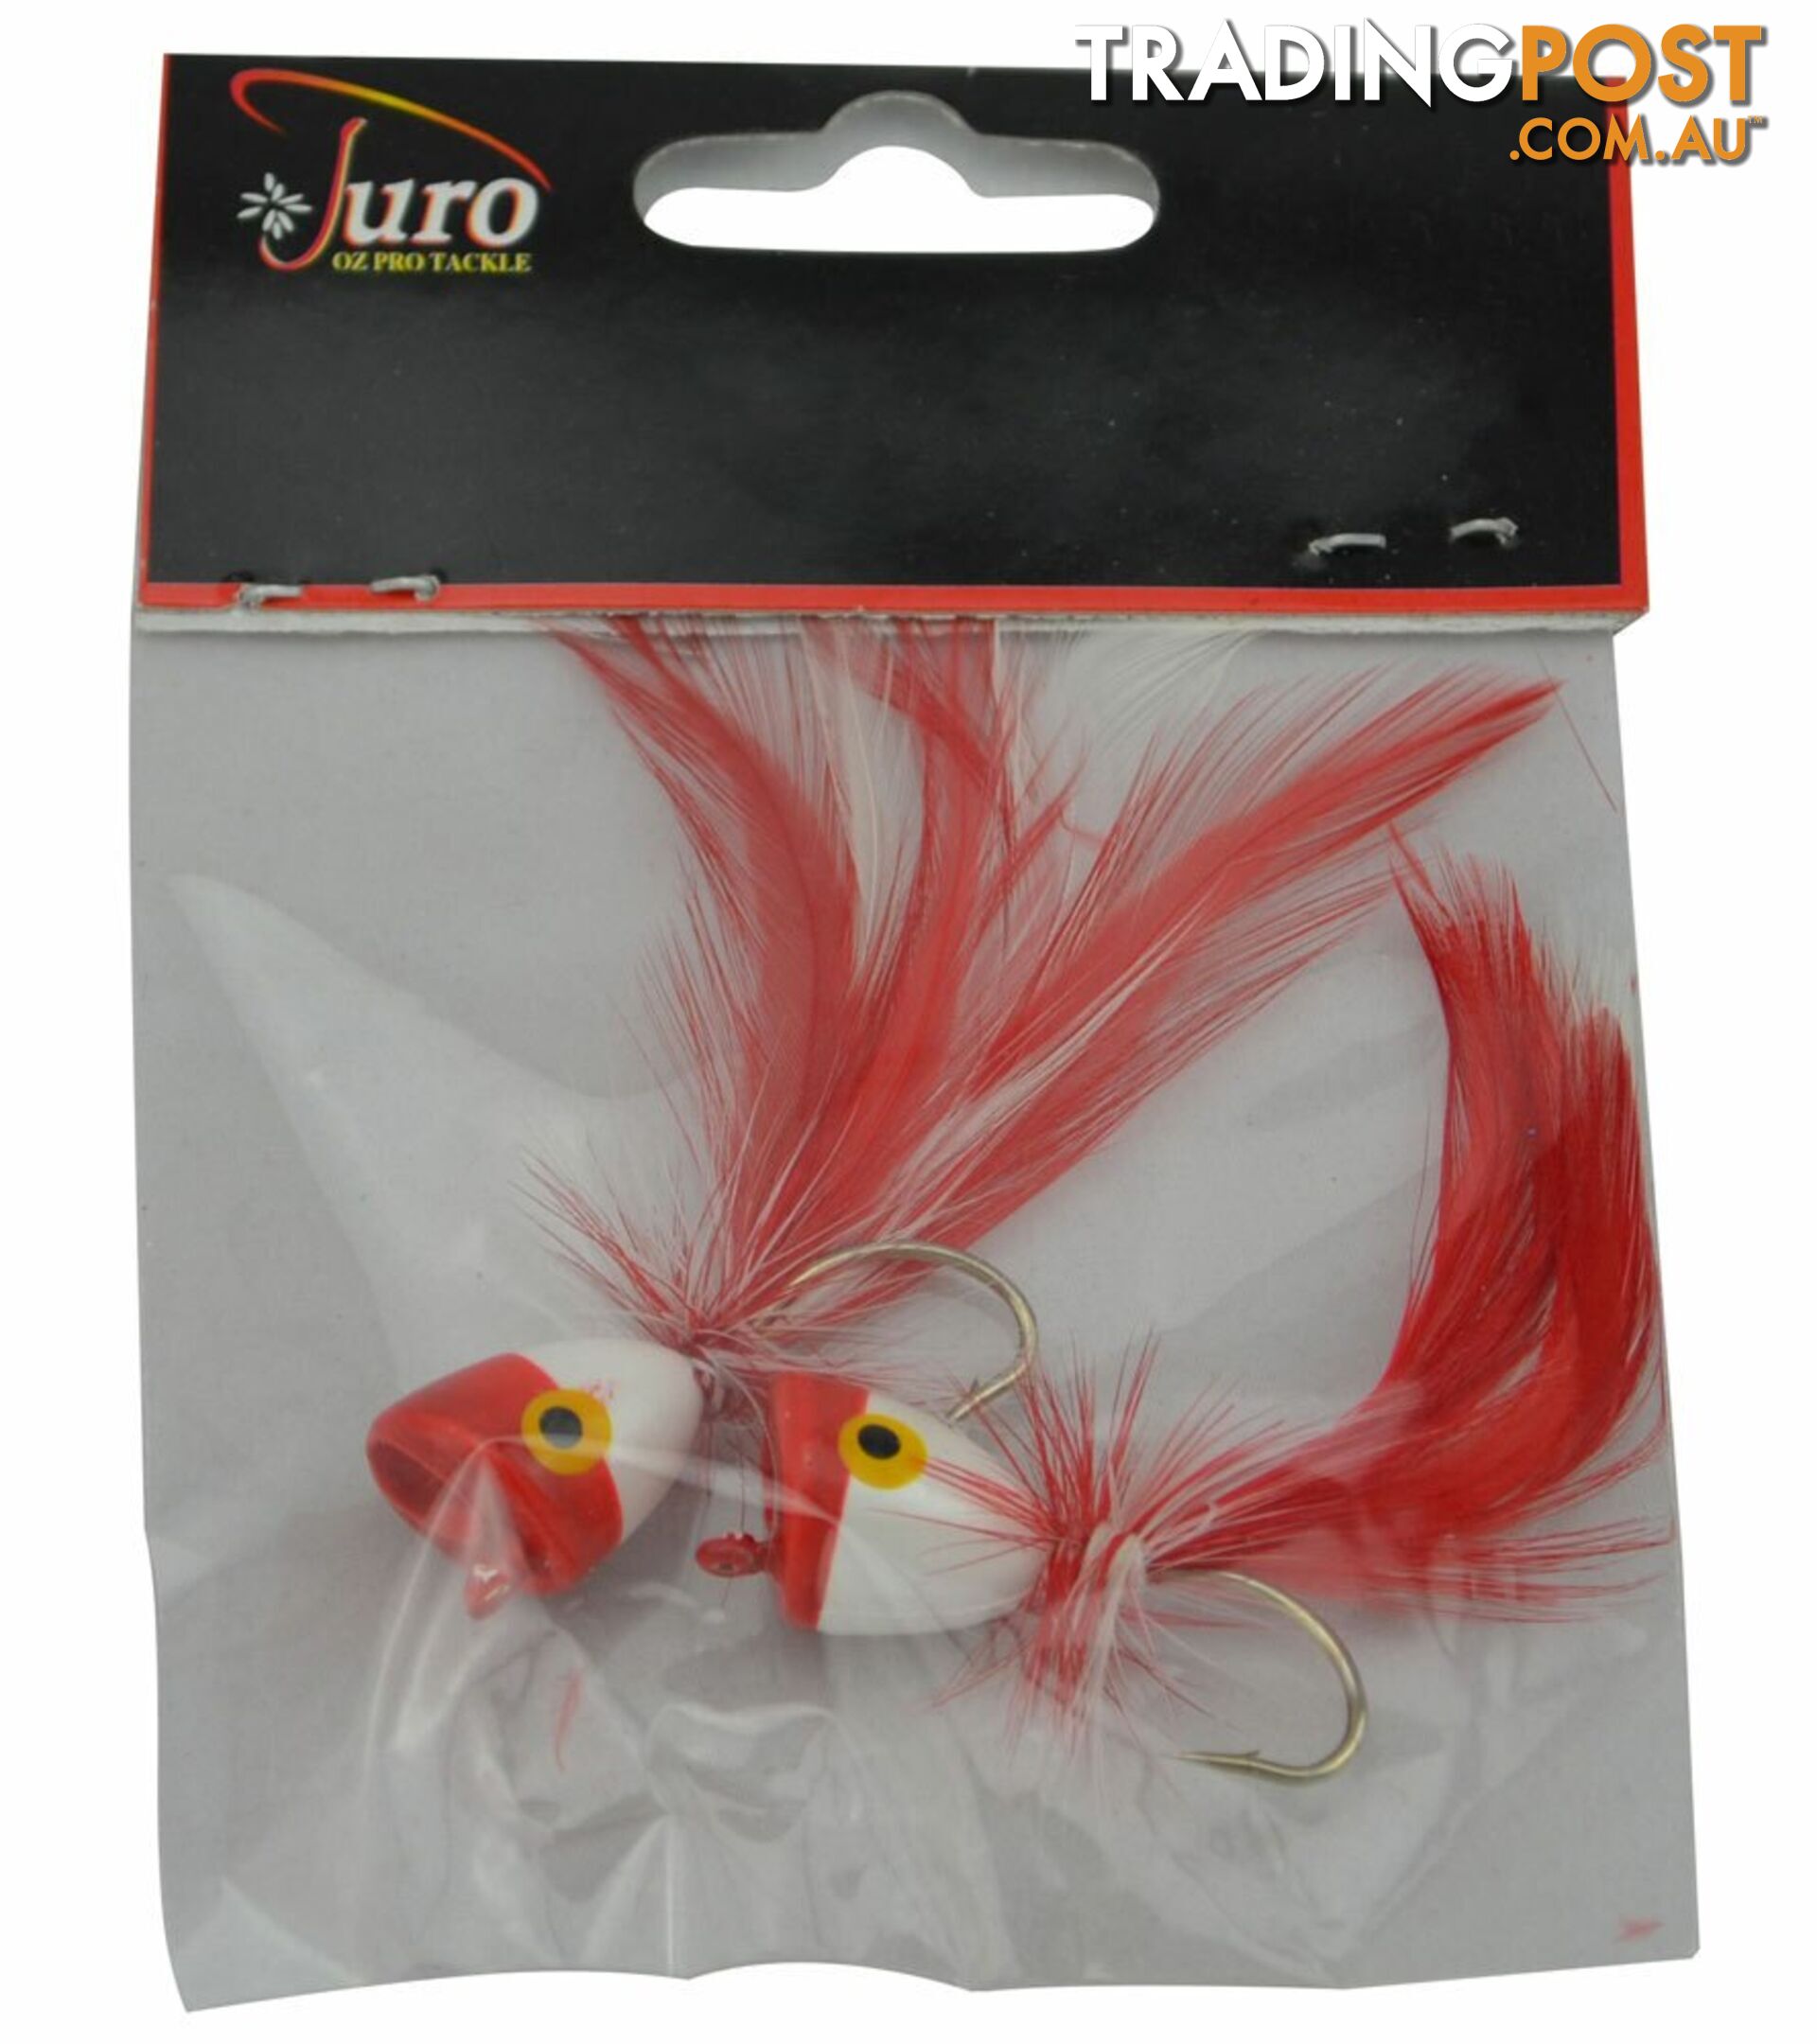 Juro Surf Poppers (Packet of 2) - Juro